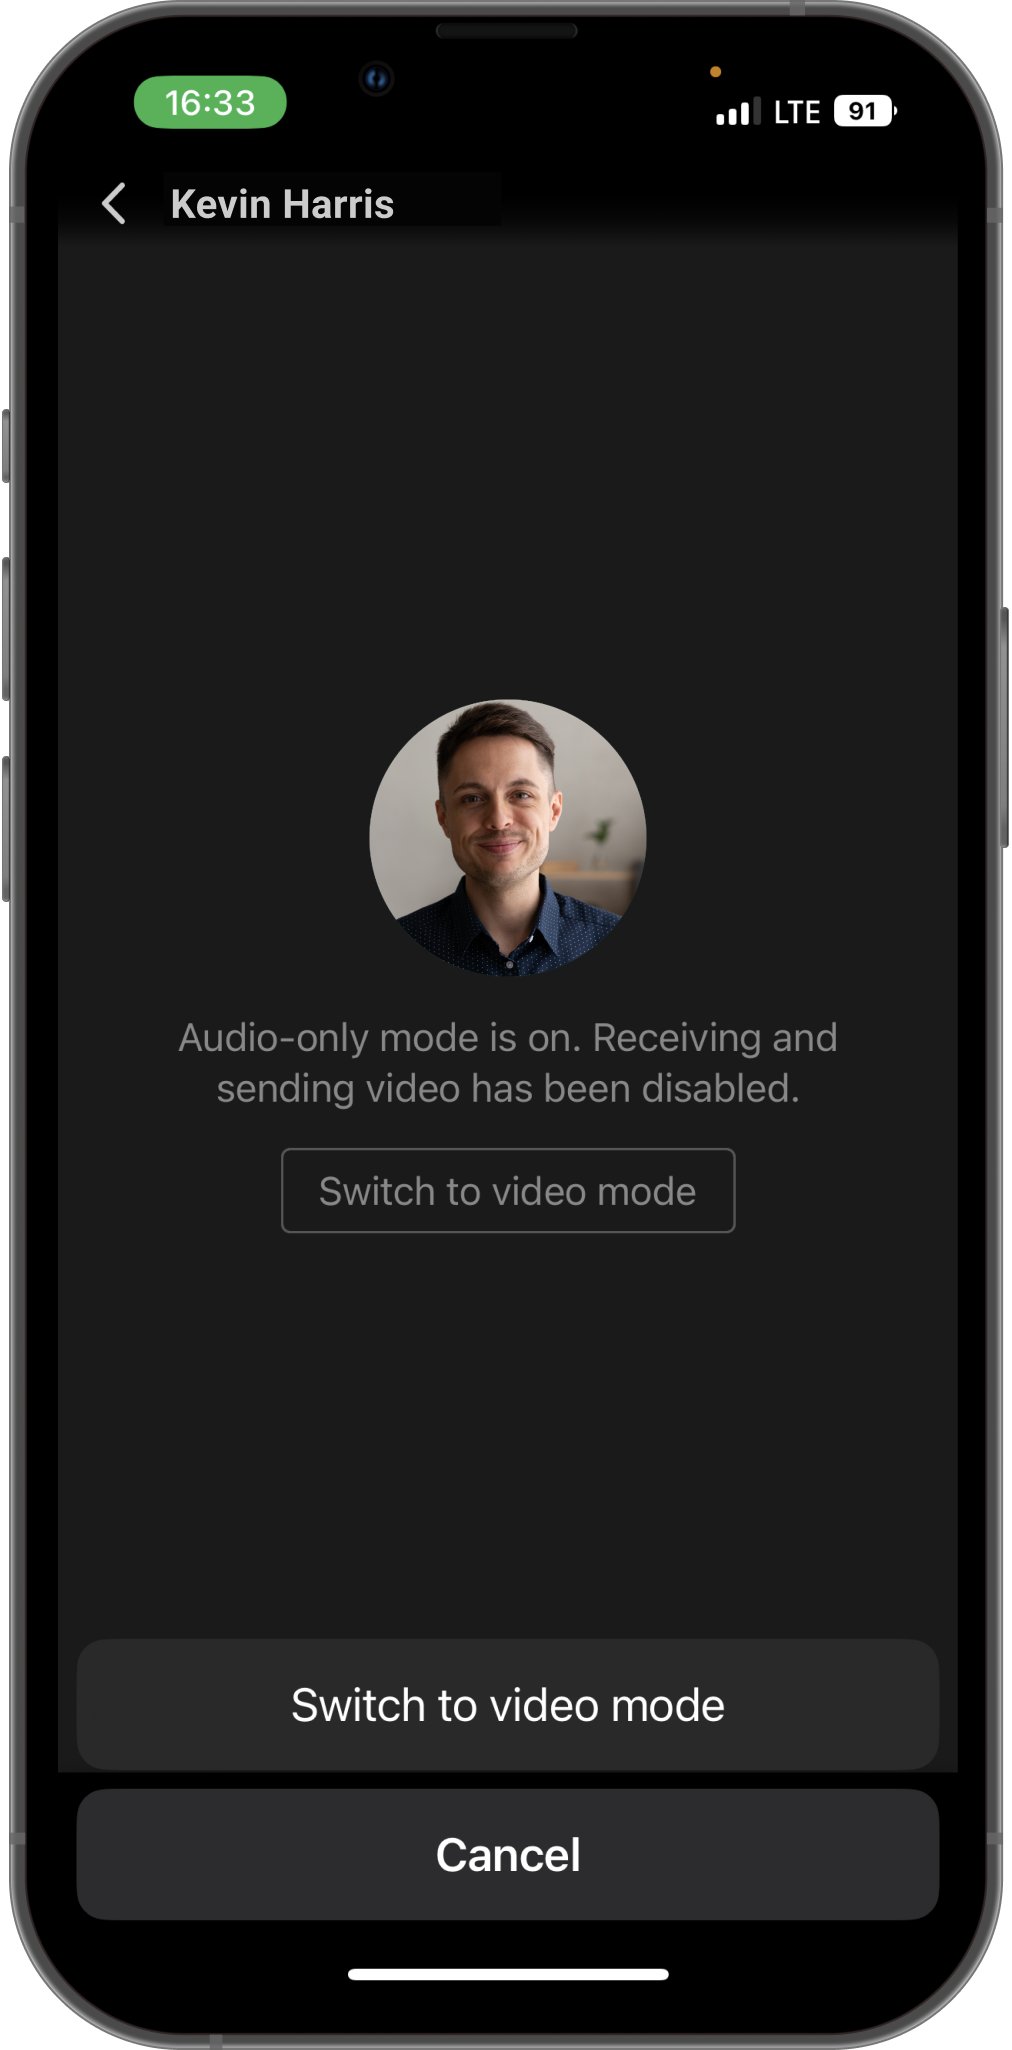 TrueConf 3.4 for iOS: File sharing and audio-only mode 14